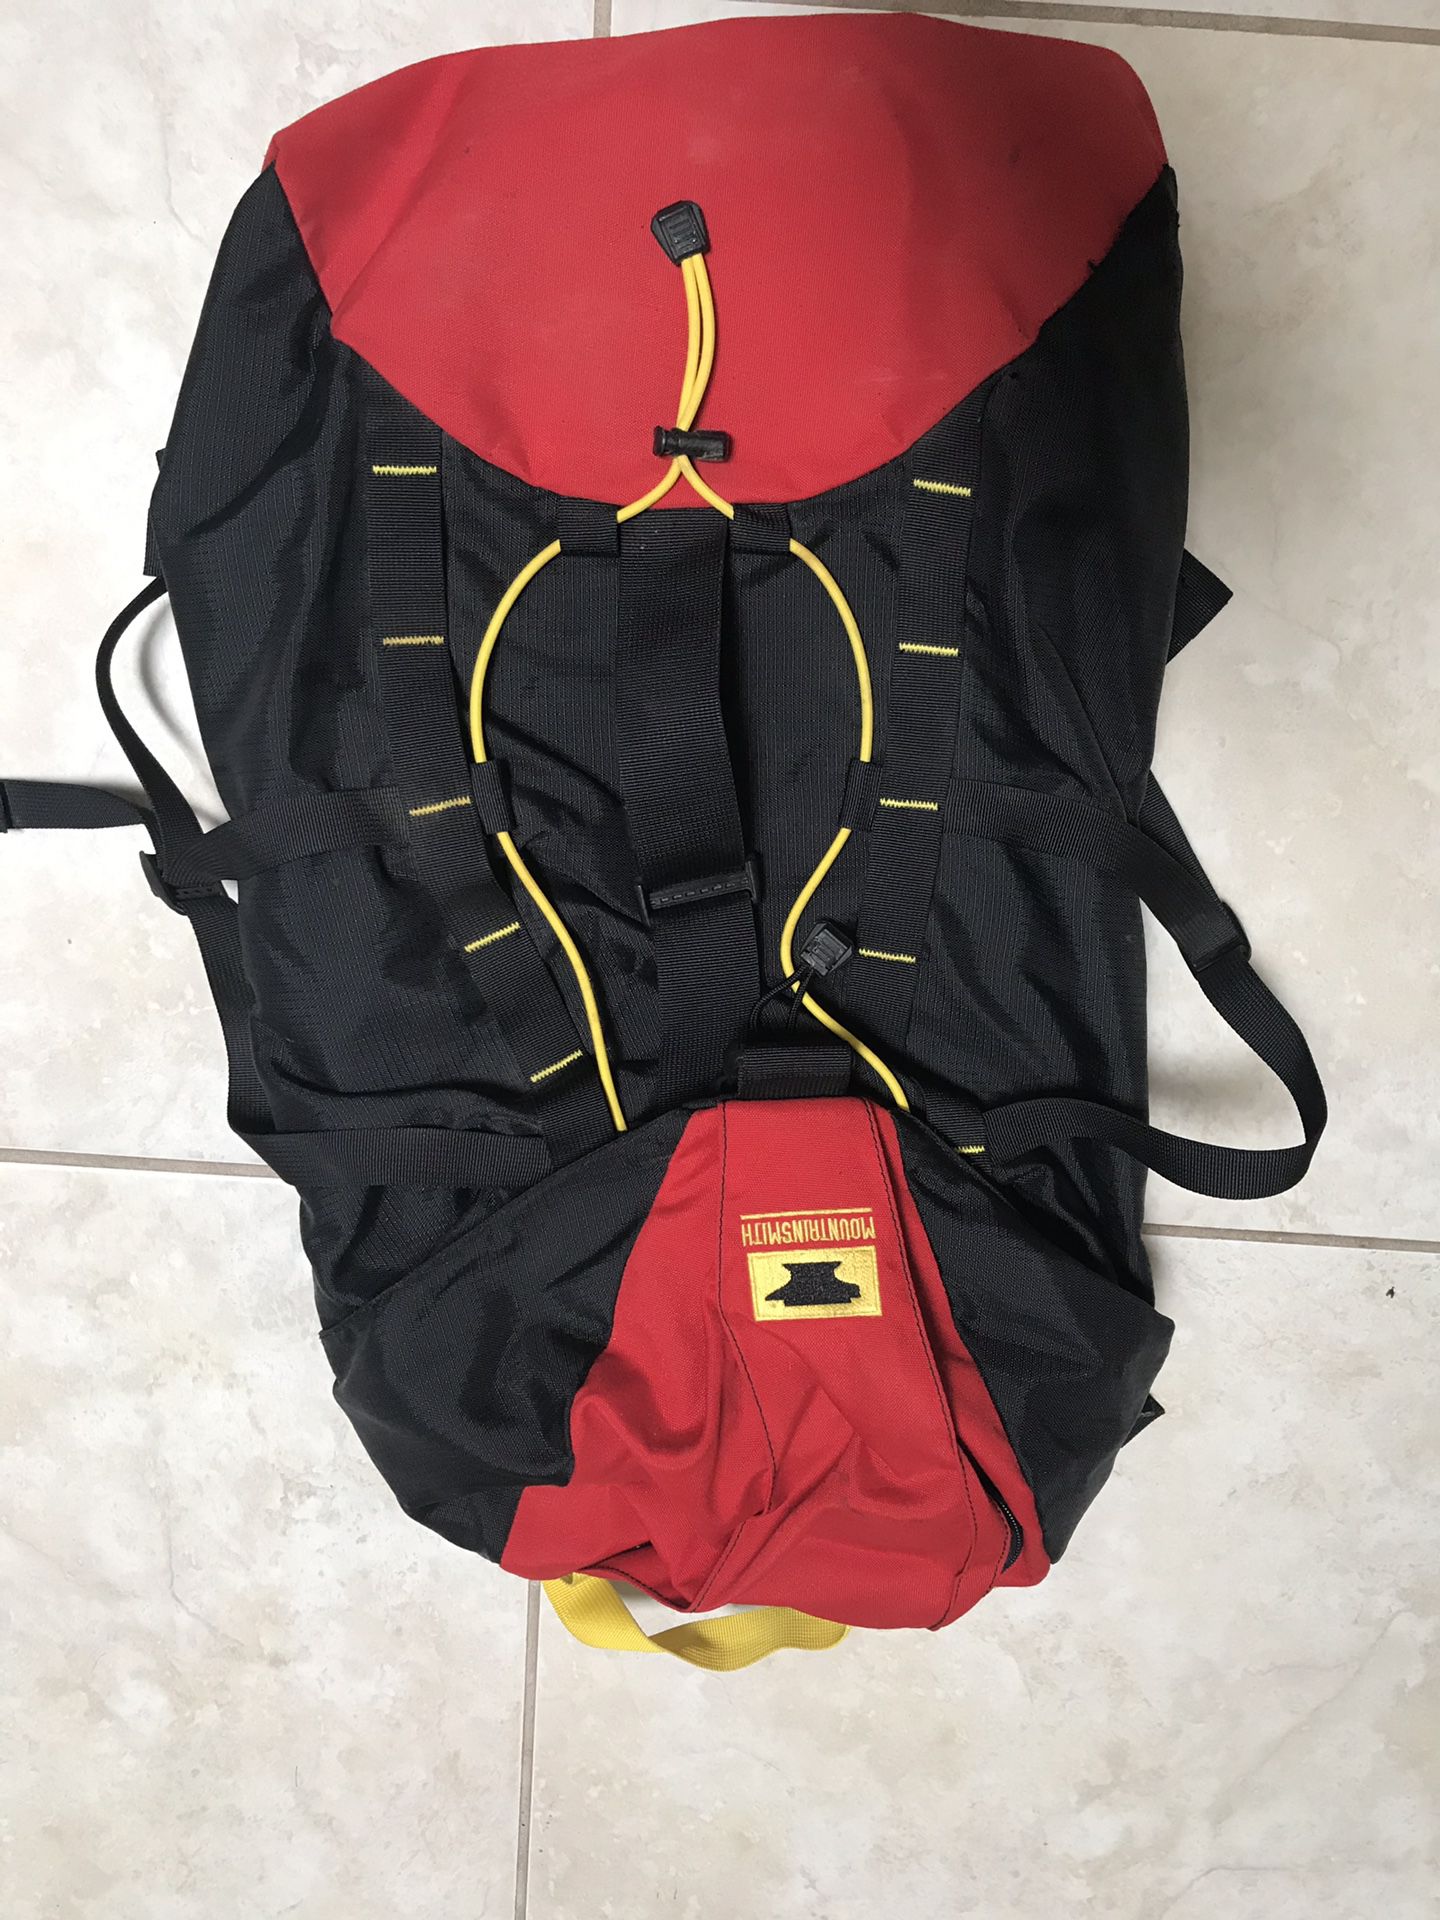 Mountainsmith backpacking pack